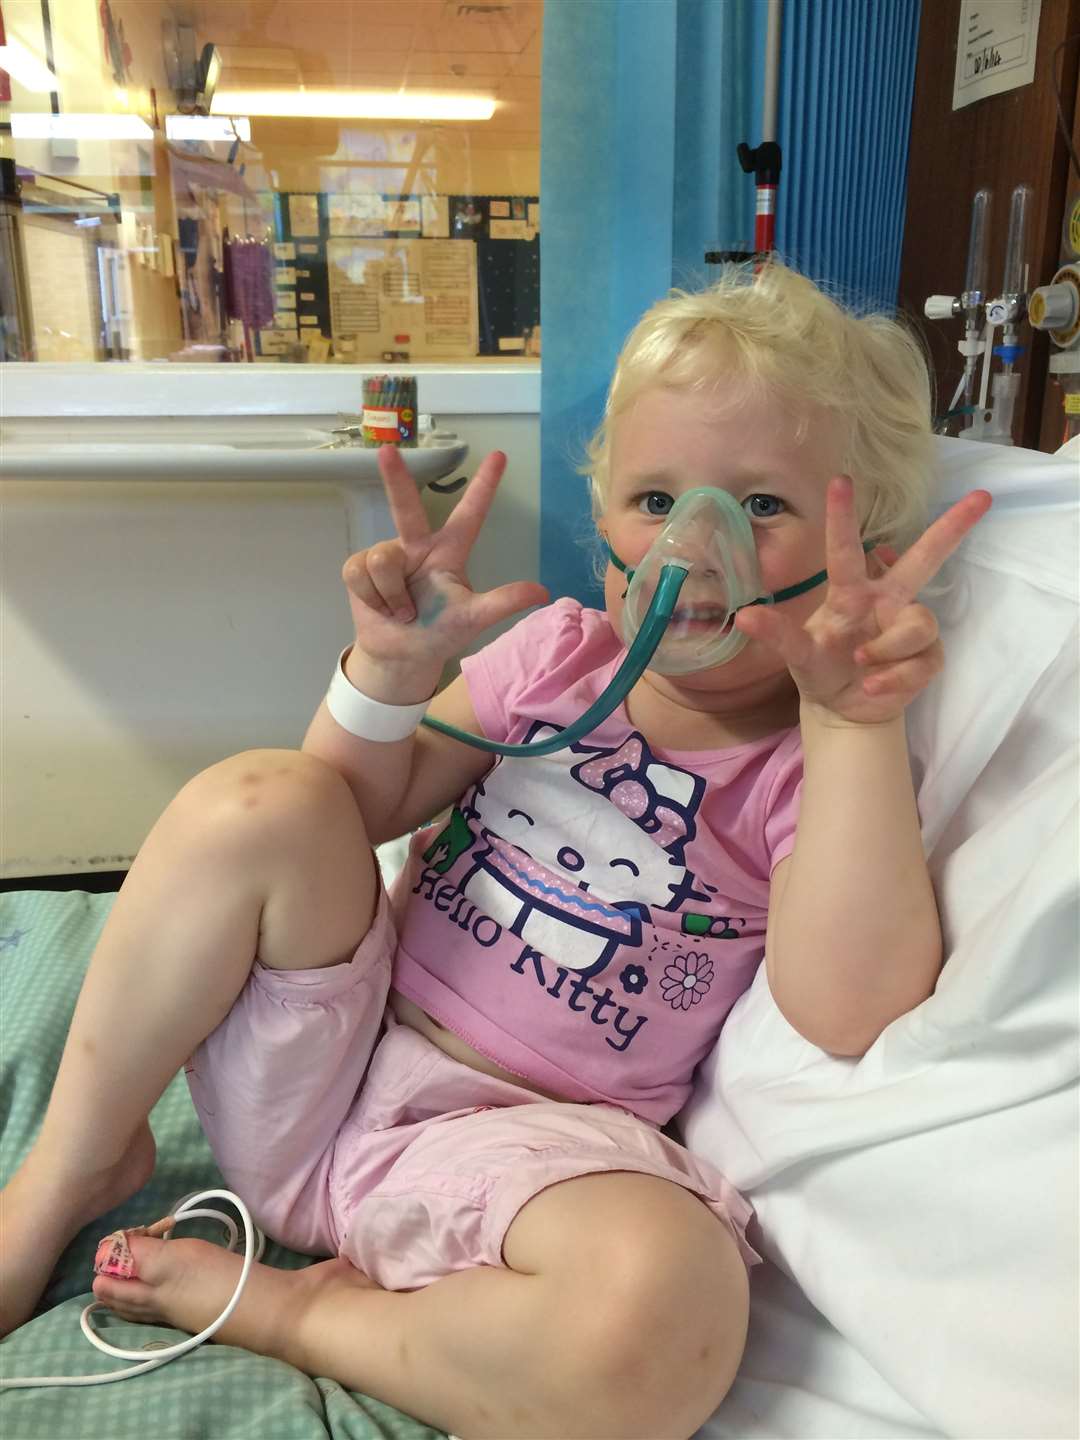 Emma Winterburn was cared for by staff at Raigmore Hospital.